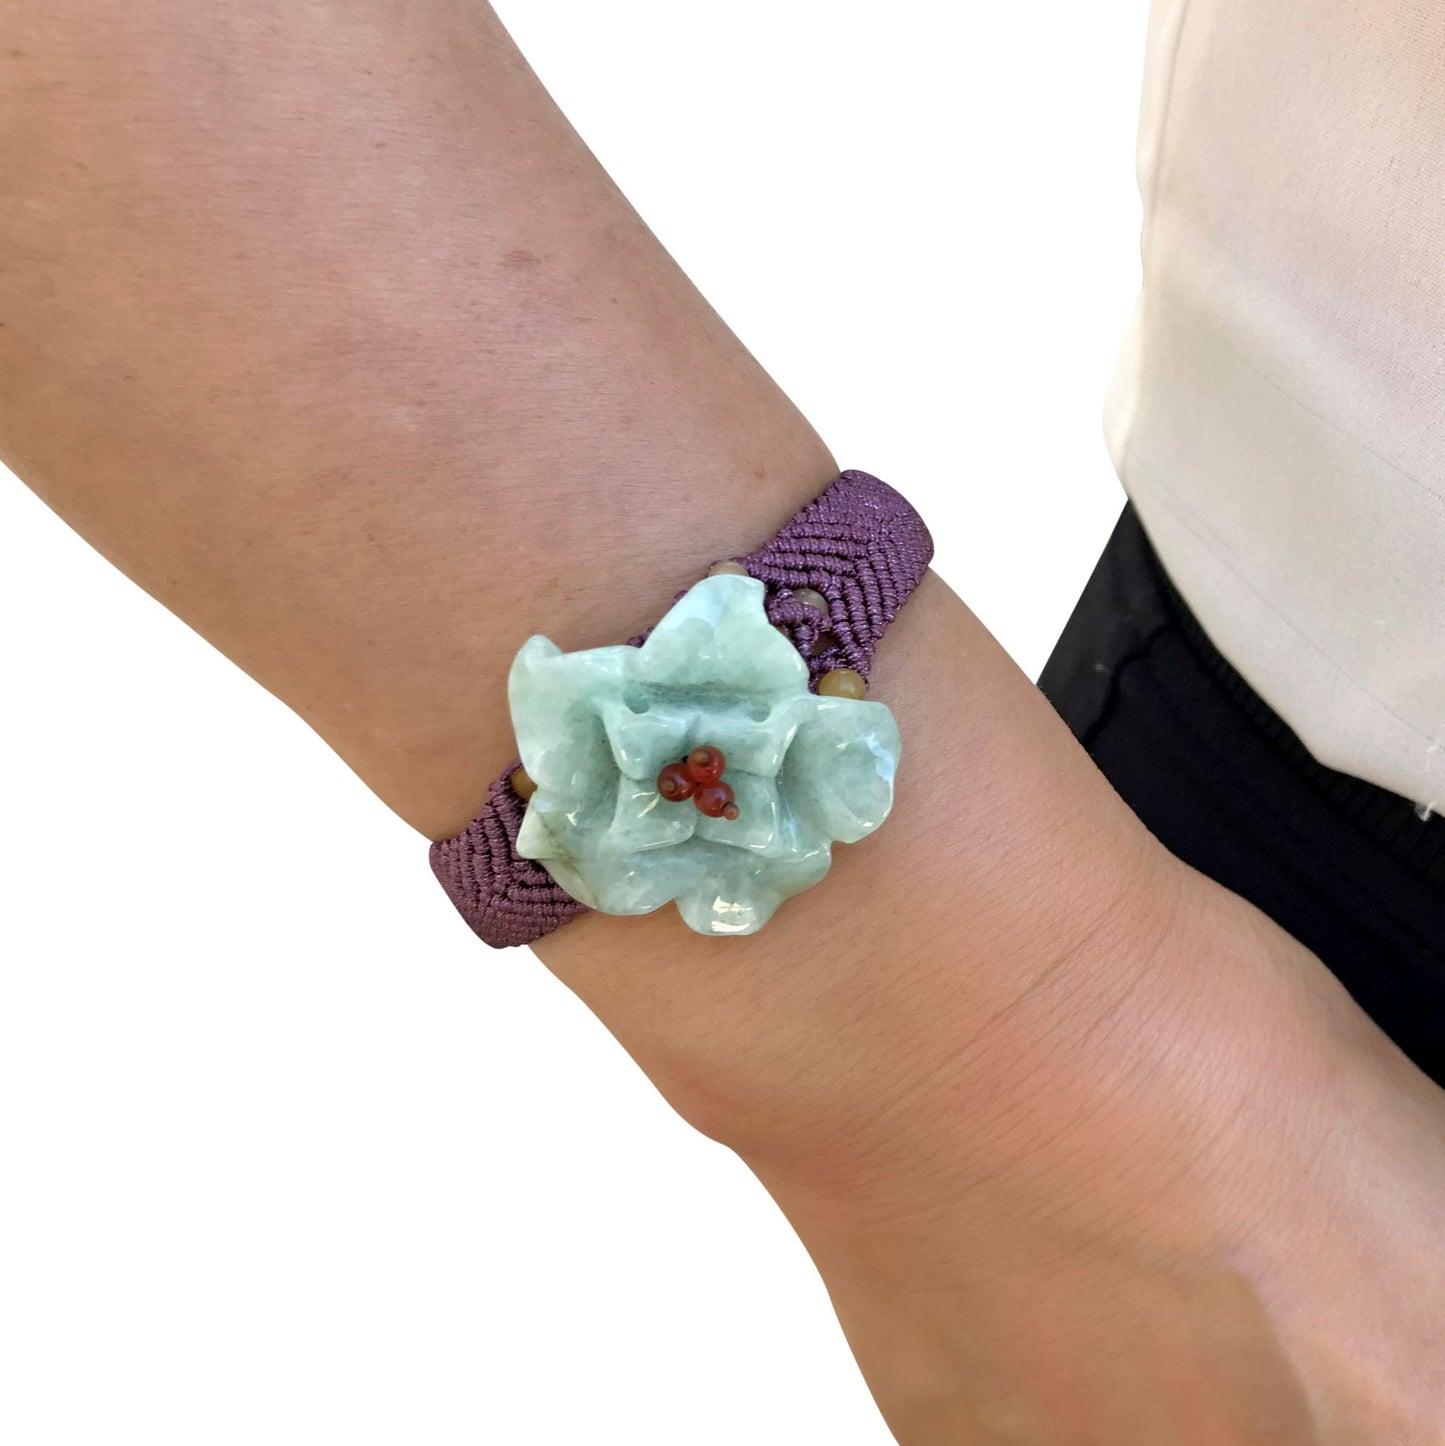 Get Eye-Catching Style with the Hoya Jade Bracelet made with Lavender Cord